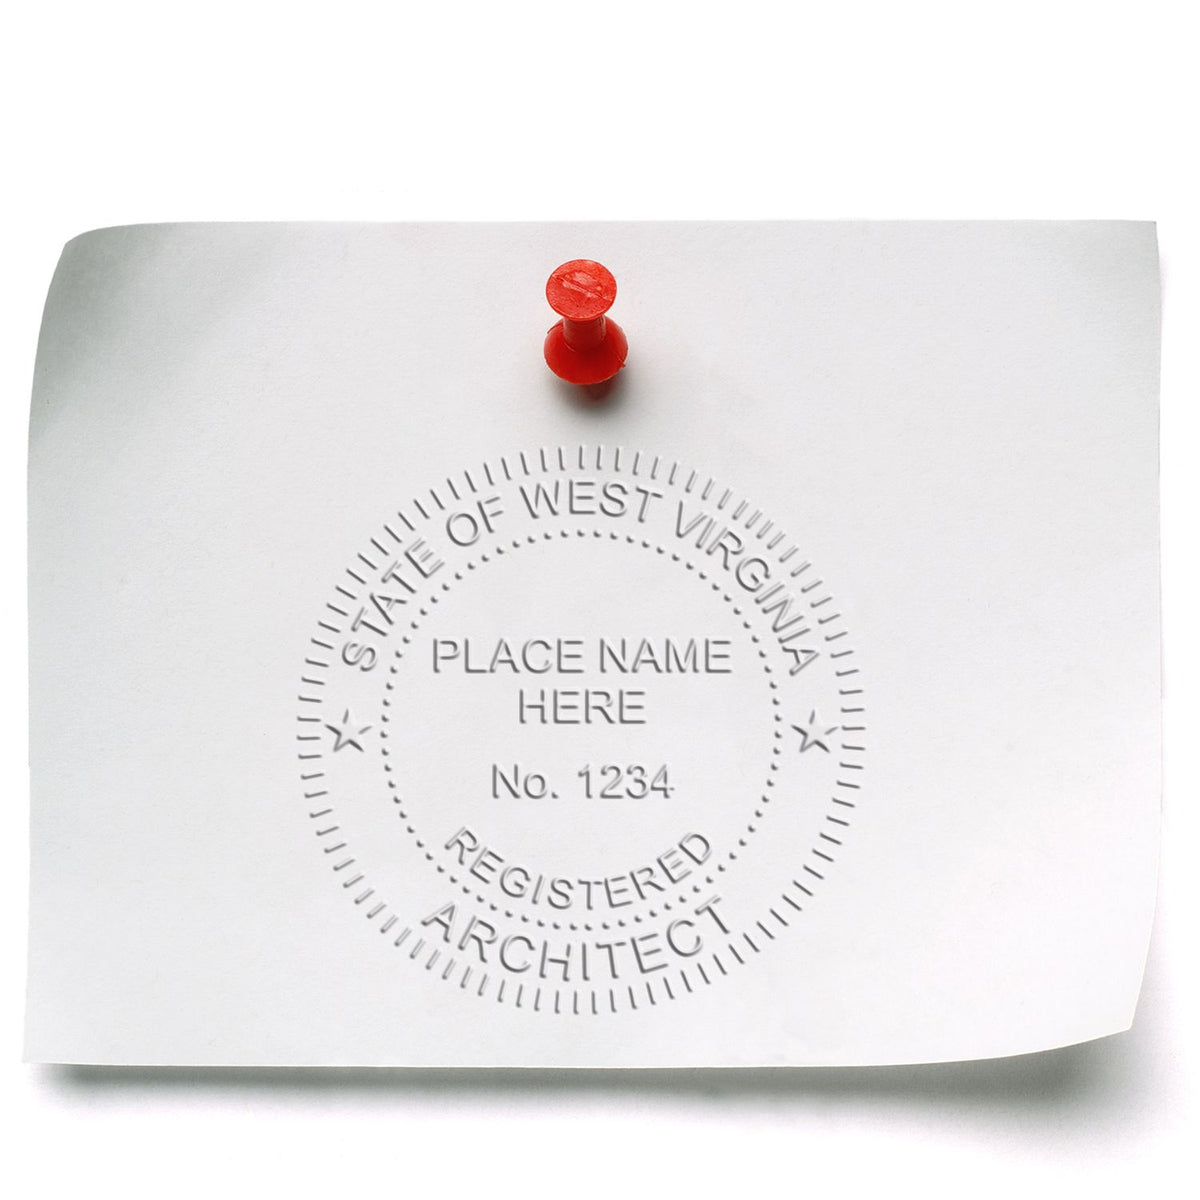 The West Virginia Desk Architect Embossing Seal stamp impression comes to life with a crisp, detailed photo on paper - showcasing true professional quality.